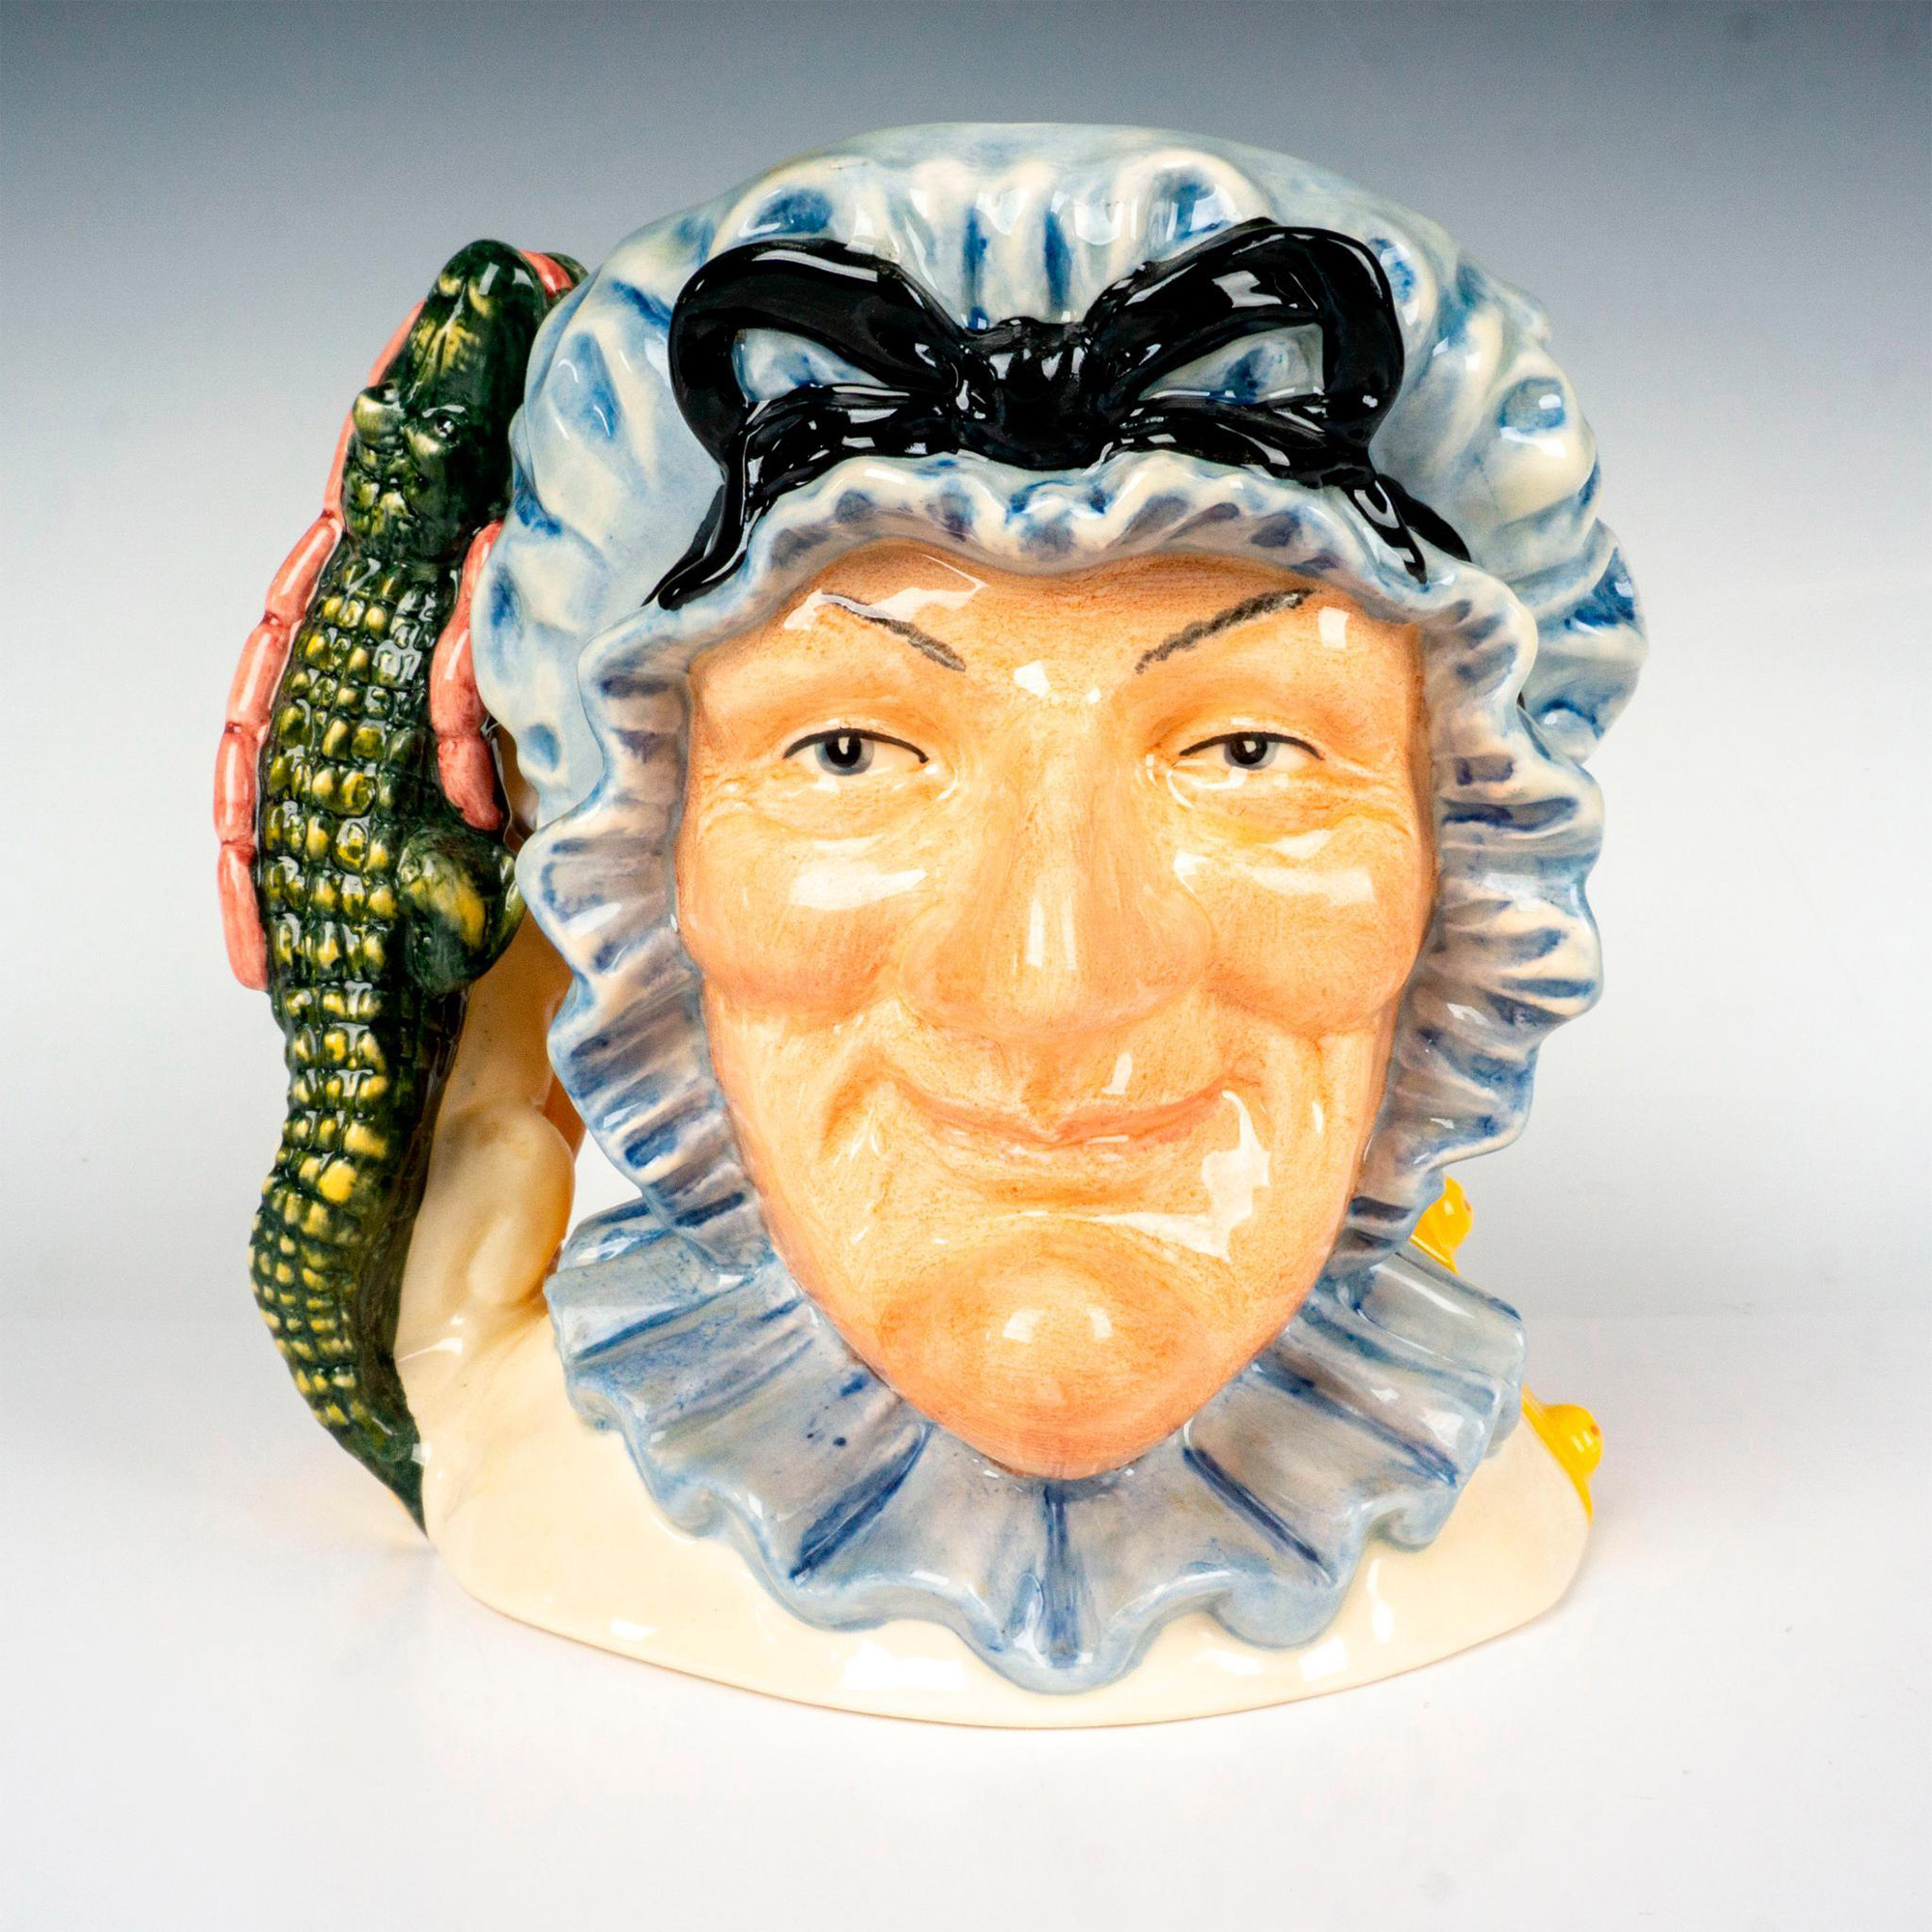 Punch and Judy D6946 (Double-Faced) - Large - Royal Doulton Character Jug - Image 3 of 4